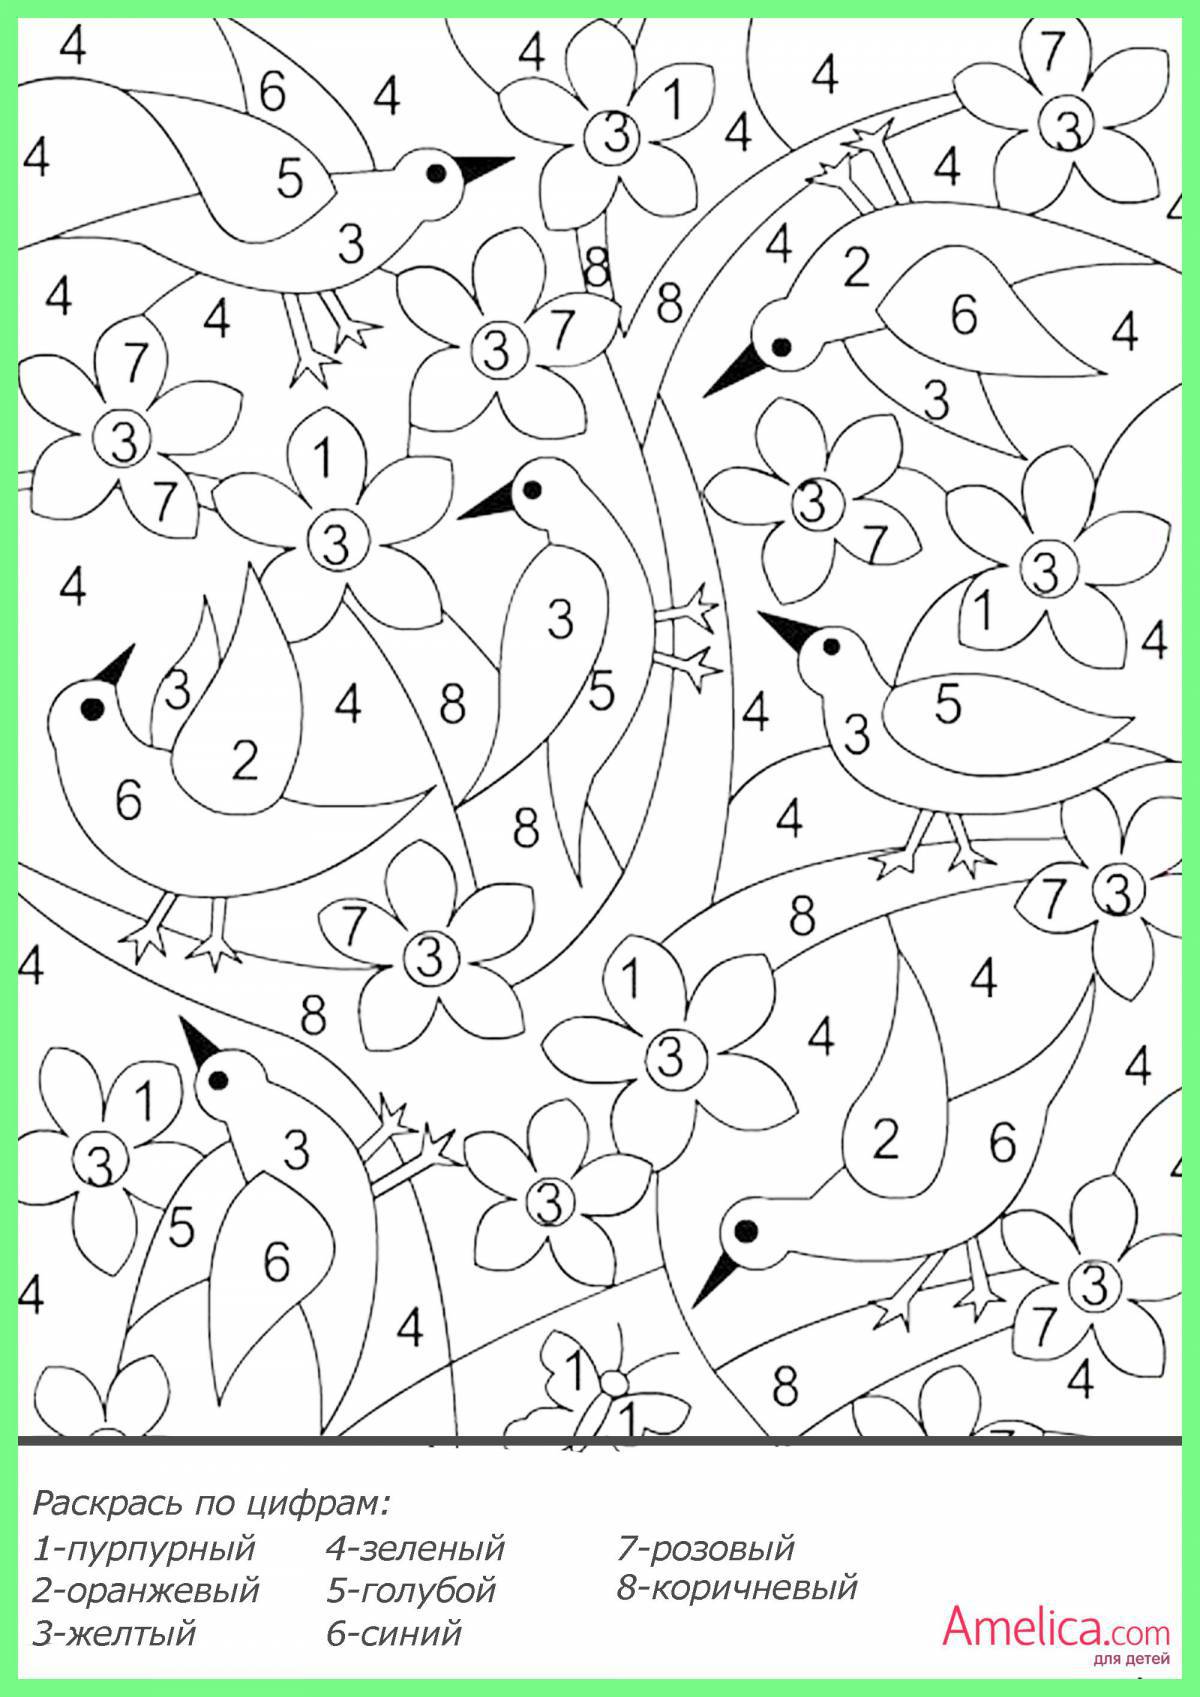 Stimulating coloring by numbers for children 6-7 years old